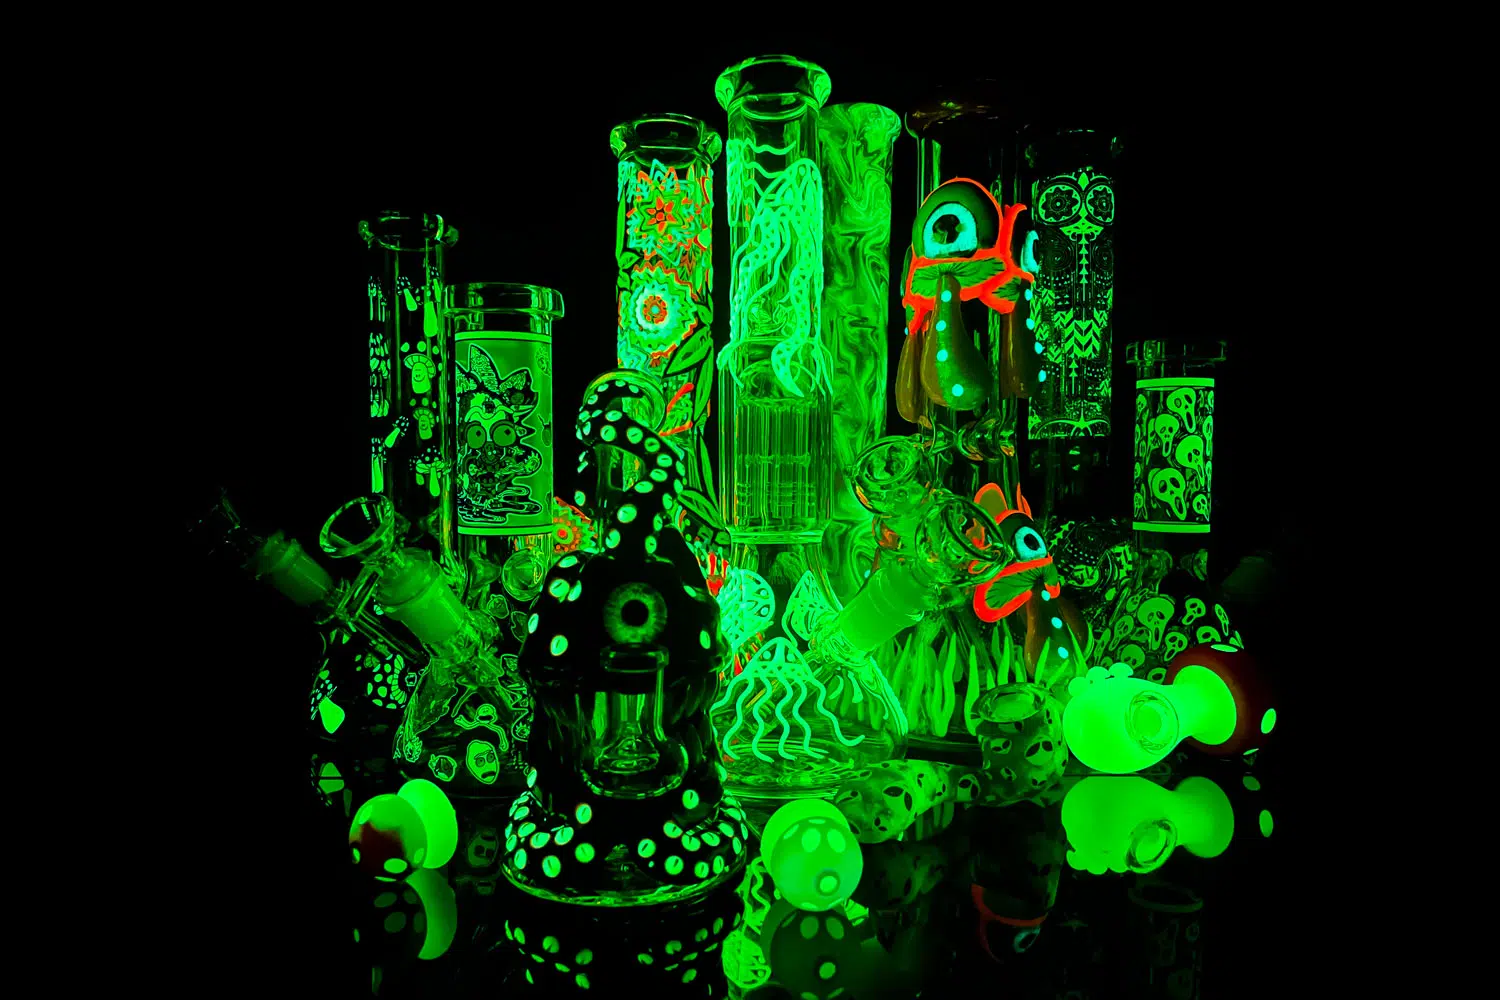 glow in the dark bongs dab rigs and pipes for sale on black table